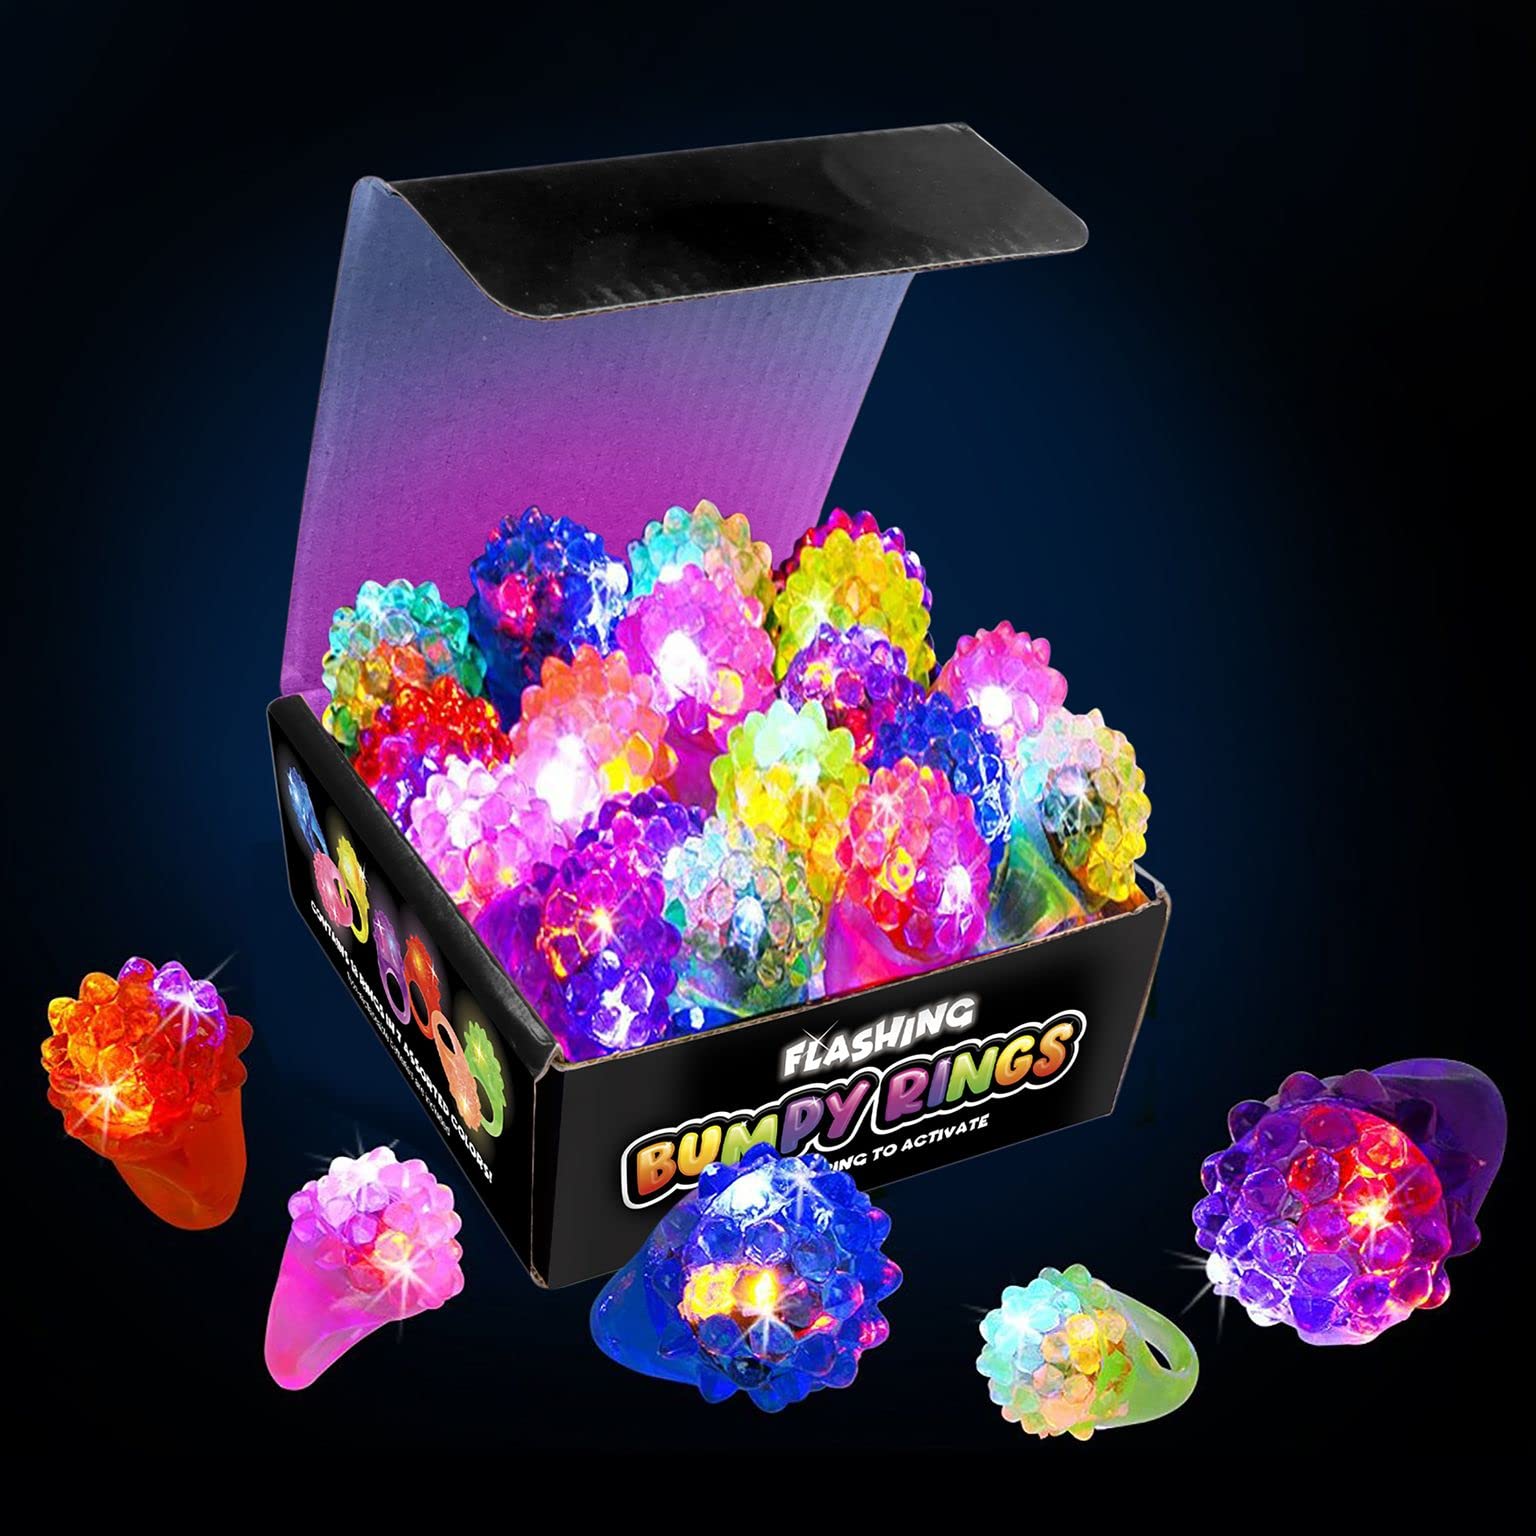 Kangaroo Kids' LED Light Up Rings or Glow-in-The-Dark Neon Ring Bumpy Toy Decorations for Birthday Party Favors, Glow Party Favors, Small Toys for Kids Prizes, Surprise Toys for Girls, Boys